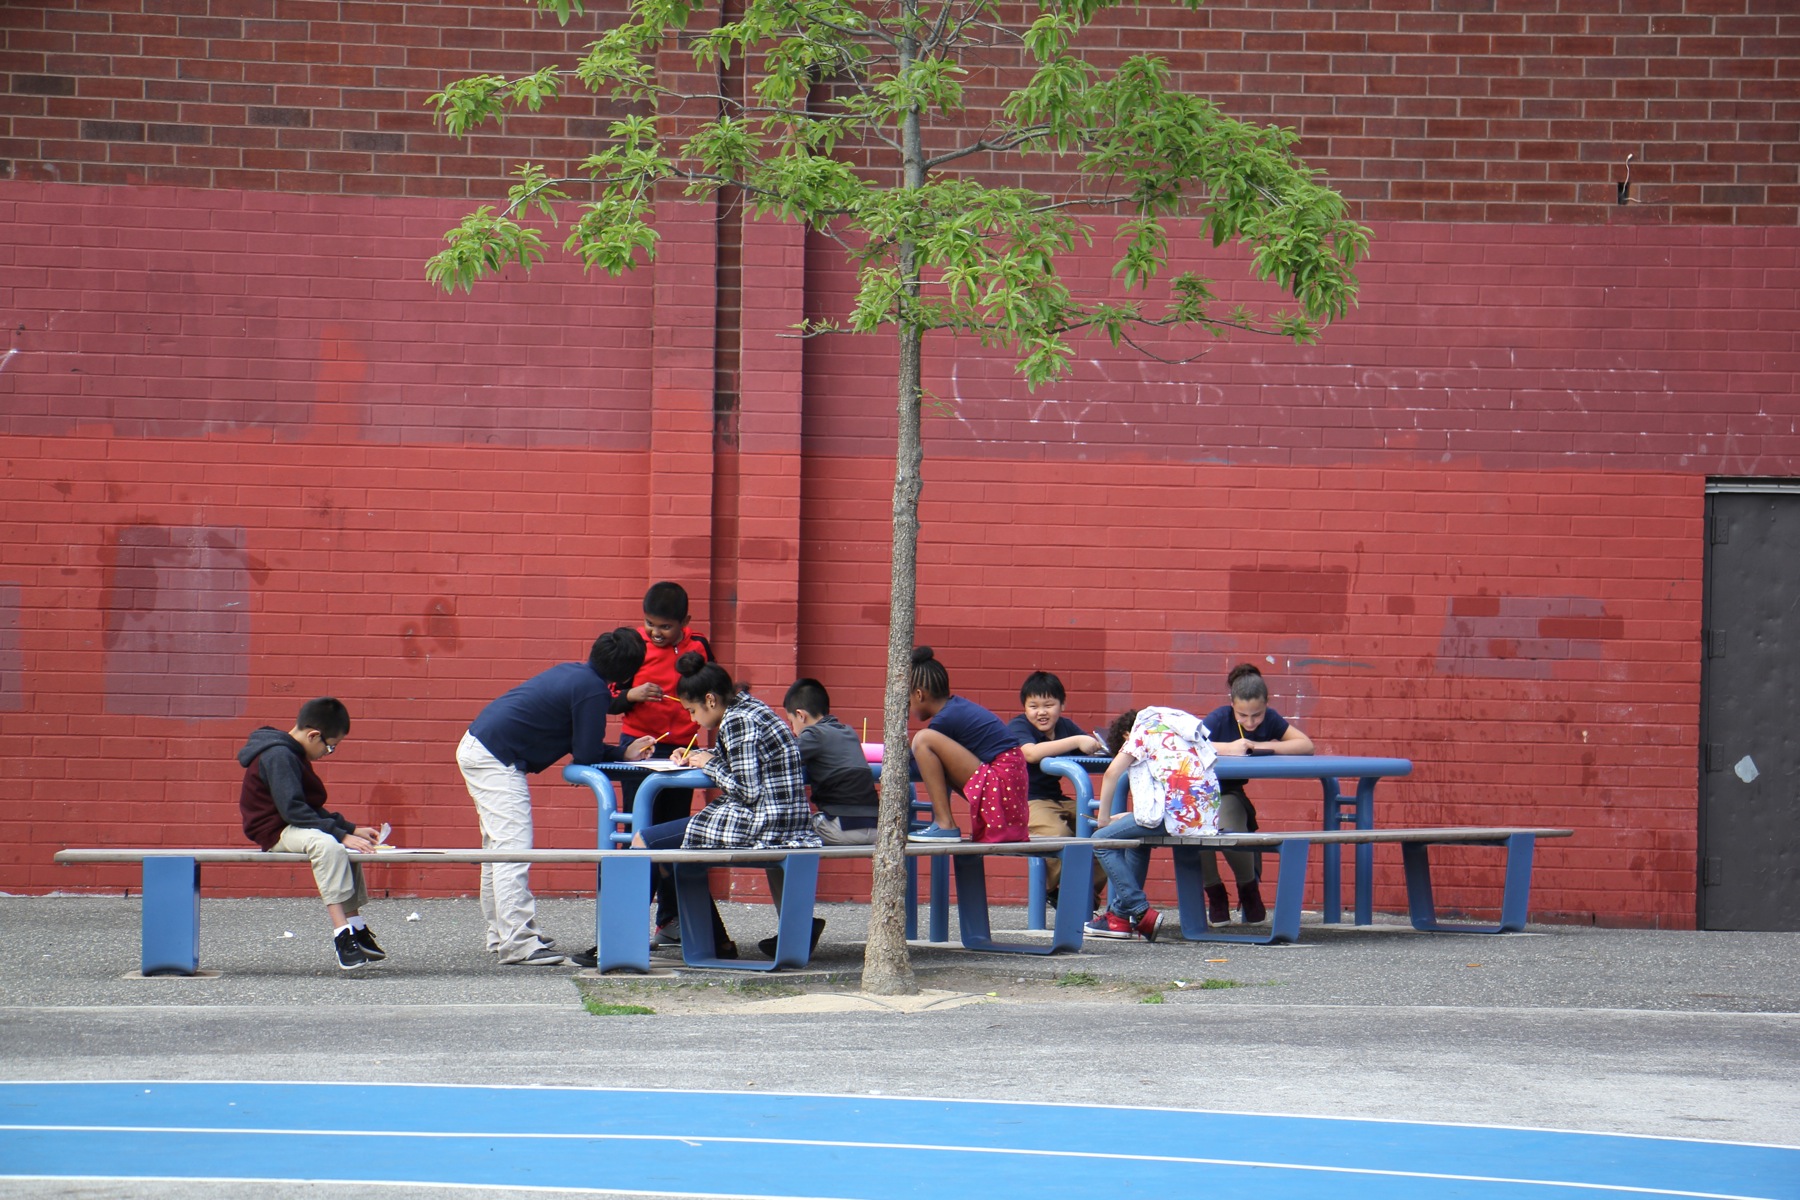 Trees shade outdoor learning spaces at Taggart School. (Emma Lee/WHYY)